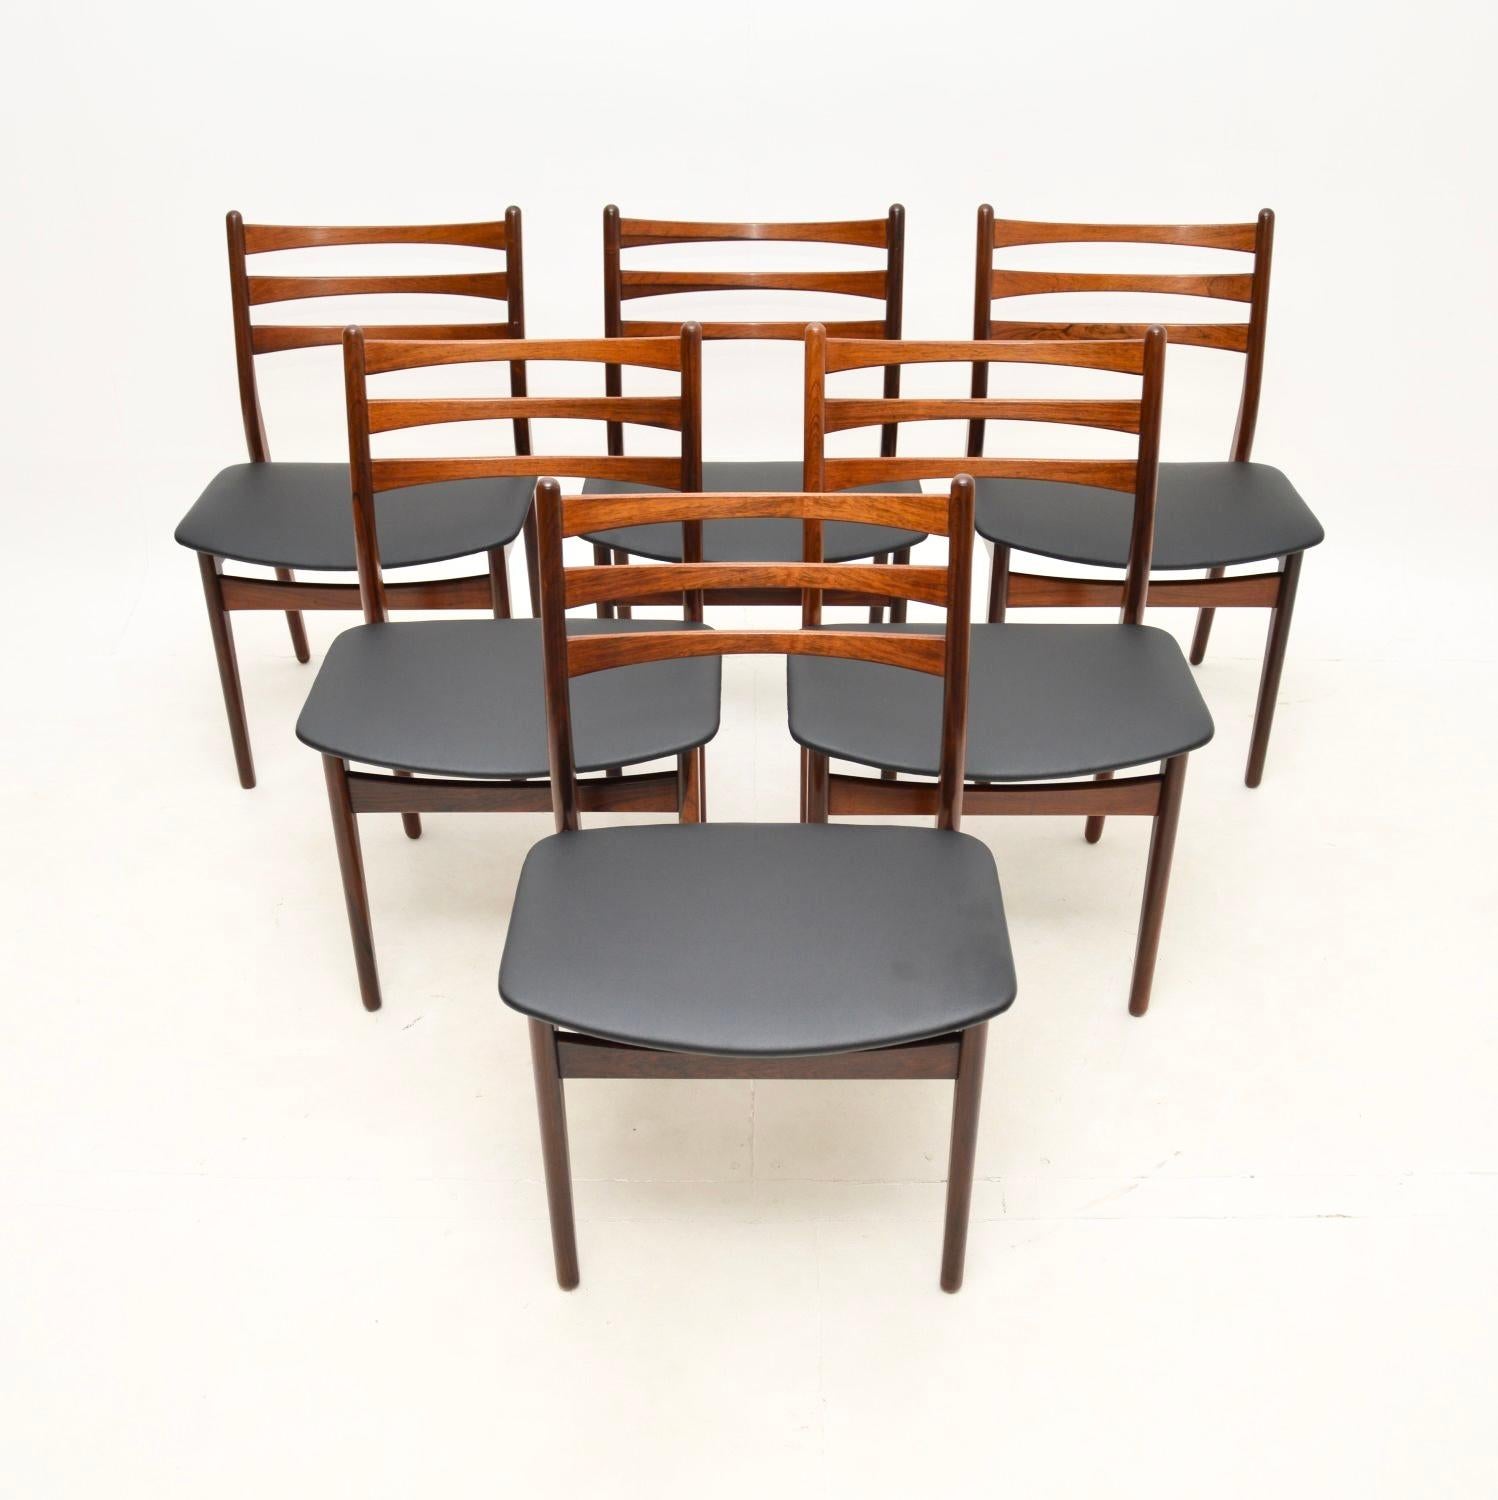 A stylish and very well made set of six Danish vintage dining chairs. They were made in Denmark, they date from the 1960’s.

The quality is superb, the frames are beautifully sculpted, with stunning grain patterns throughout. They look amazing from